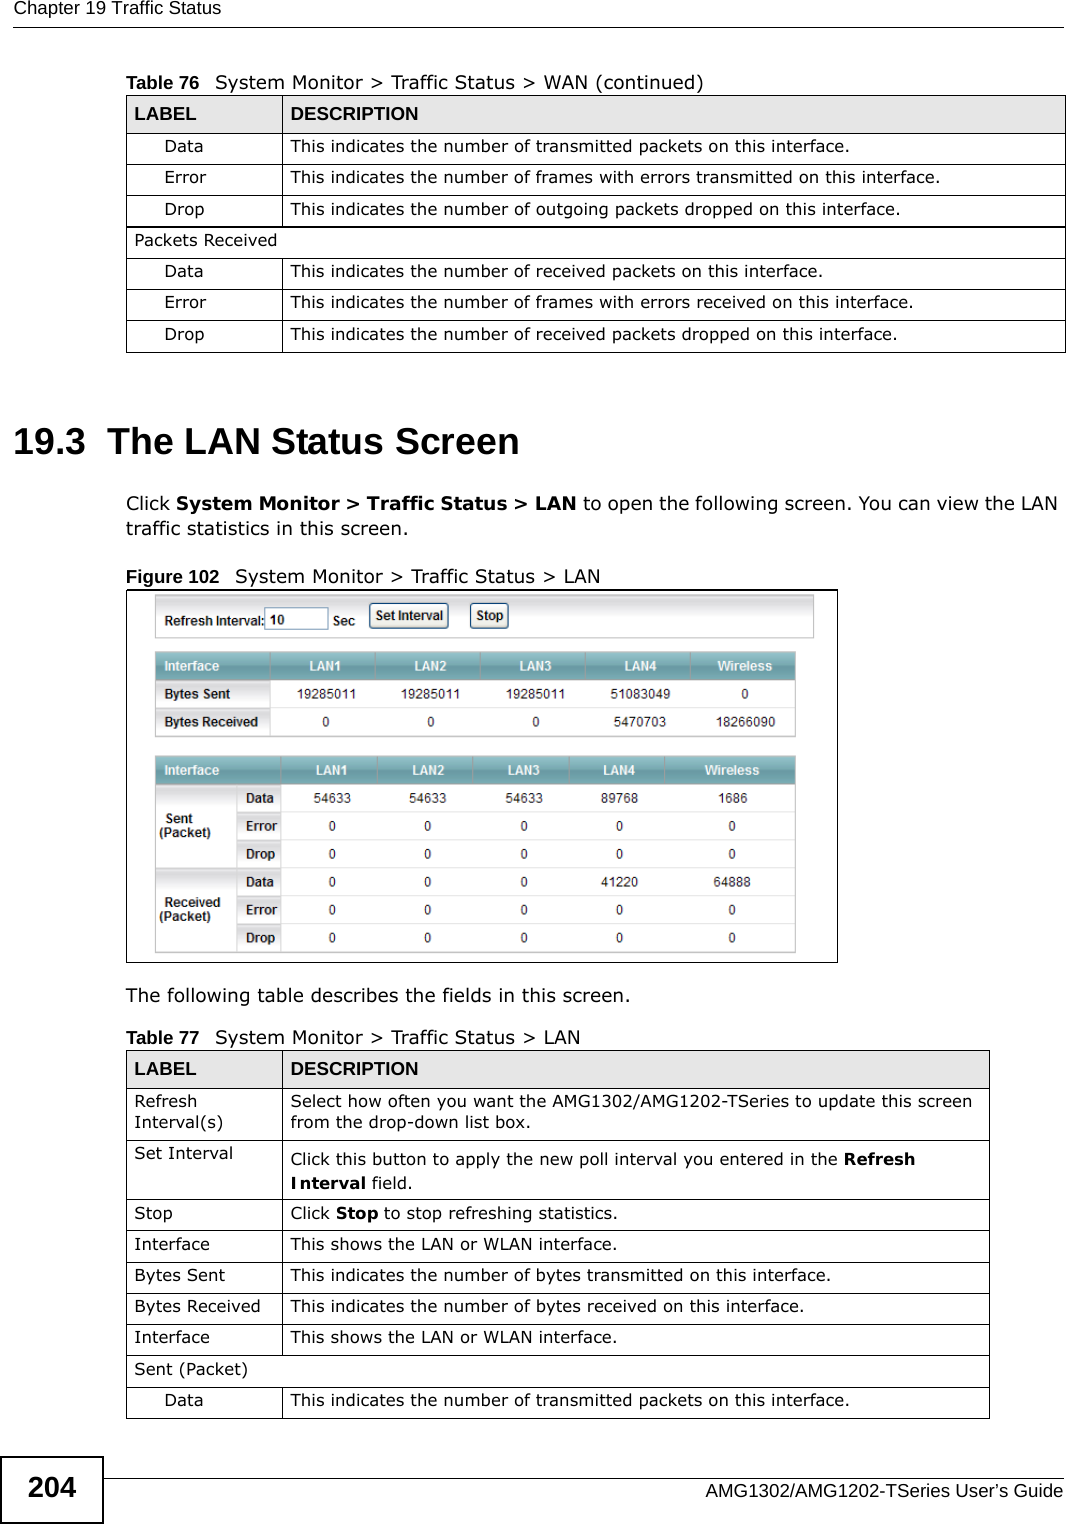 Chapter 19 Traffic StatusAMG1302/AMG1202-TSeries User’s Guide20419.3  The LAN Status ScreenClick System Monitor &gt; Traffic Status &gt; LAN to open the following screen. You can view the LAN traffic statistics in this screen.Figure 102   System Monitor &gt; Traffic Status &gt; LANThe following table describes the fields in this screen.   Data  This indicates the number of transmitted packets on this interface.Error This indicates the number of frames with errors transmitted on this interface.Drop This indicates the number of outgoing packets dropped on this interface.Packets ReceivedData  This indicates the number of received packets on this interface.Error This indicates the number of frames with errors received on this interface.Drop This indicates the number of received packets dropped on this interface.Table 76   System Monitor &gt; Traffic Status &gt; WAN (continued)LABEL DESCRIPTIONTable 77   System Monitor &gt; Traffic Status &gt; LANLABEL DESCRIPTIONRefresh Interval(s)Select how often you want the AMG1302/AMG1202-TSeries to update this screen from the drop-down list box.Set Interval Click this button to apply the new poll interval you entered in the Refresh Interval field.Stop Click Stop to stop refreshing statistics.Interface This shows the LAN or WLAN interface. Bytes Sent This indicates the number of bytes transmitted on this interface.Bytes Received This indicates the number of bytes received on this interface.Interface This shows the LAN or WLAN interface. Sent (Packet)  Data  This indicates the number of transmitted packets on this interface.